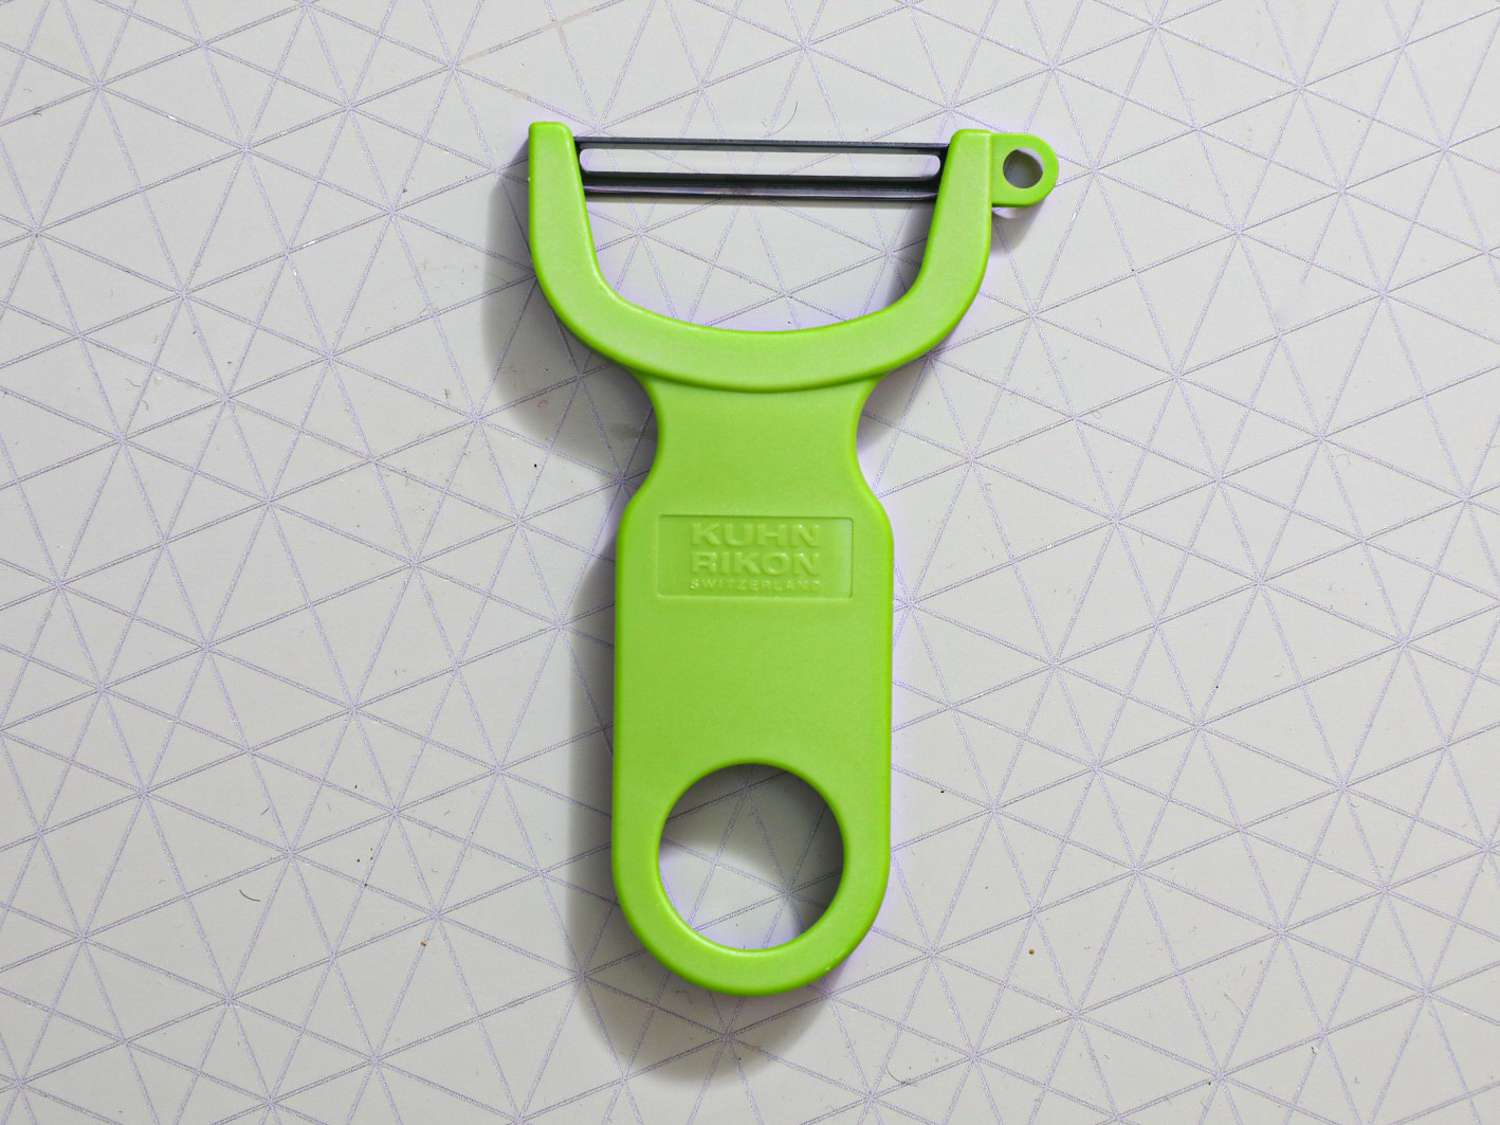 A green vegetable peeler on a grey surface